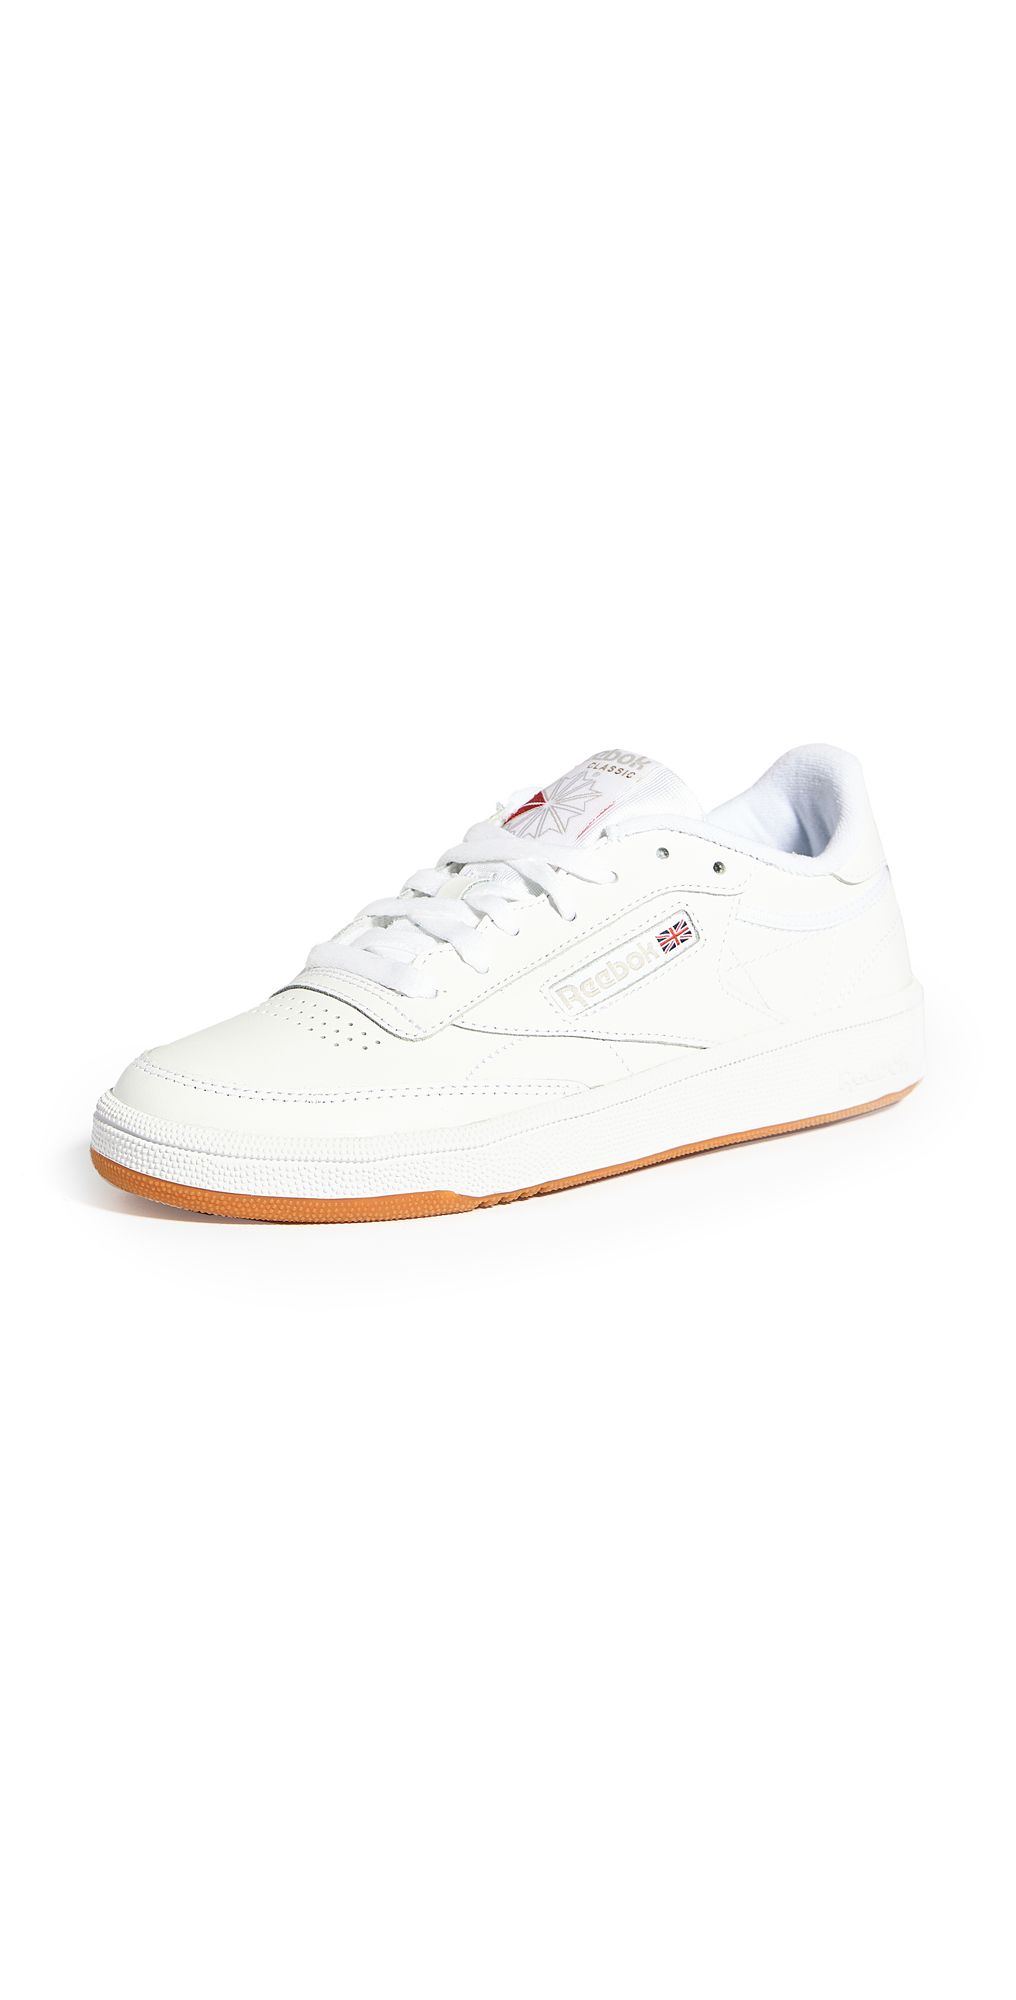 Reebok Club C 85 Classic Lace Up Sneakers | Shopbop